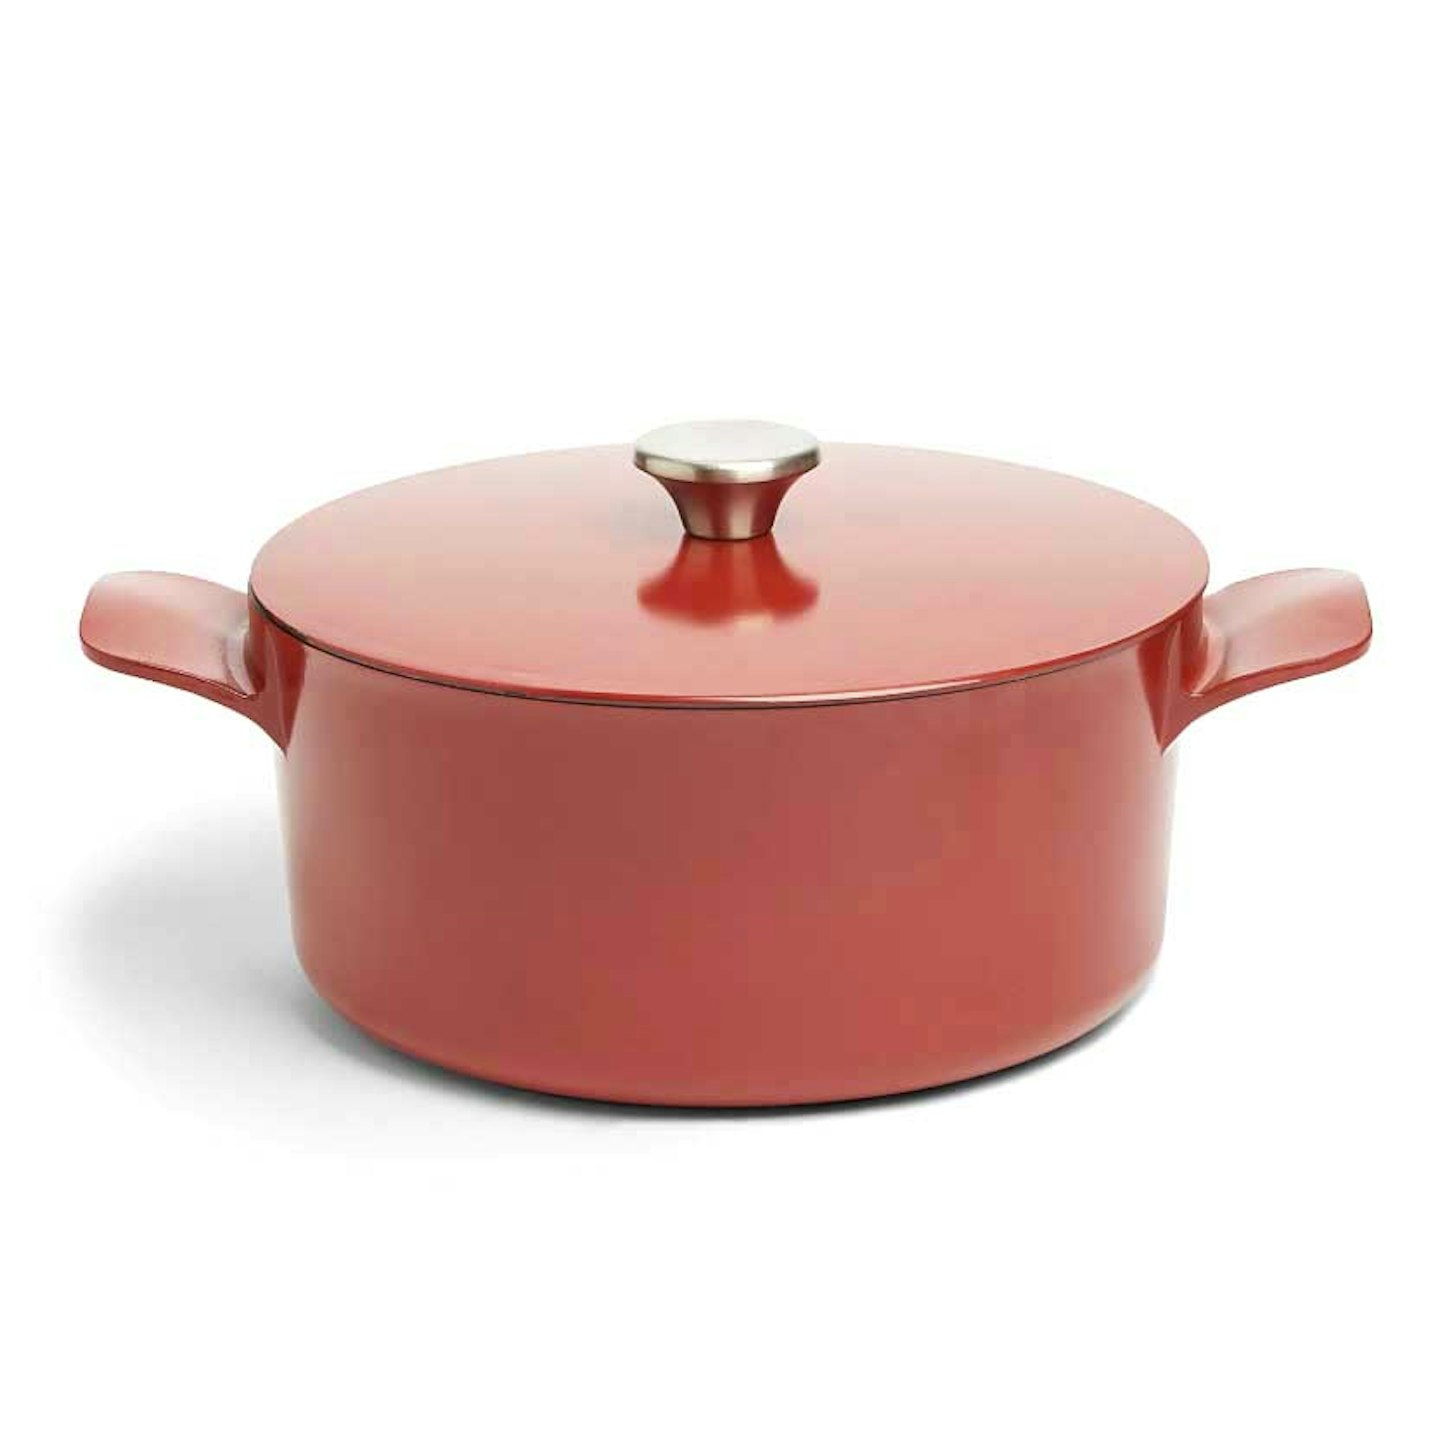 Brand New in Box Berndes 24cm 4.0 Litre Cast Iron Red Round Casserole Dish  With Lid 